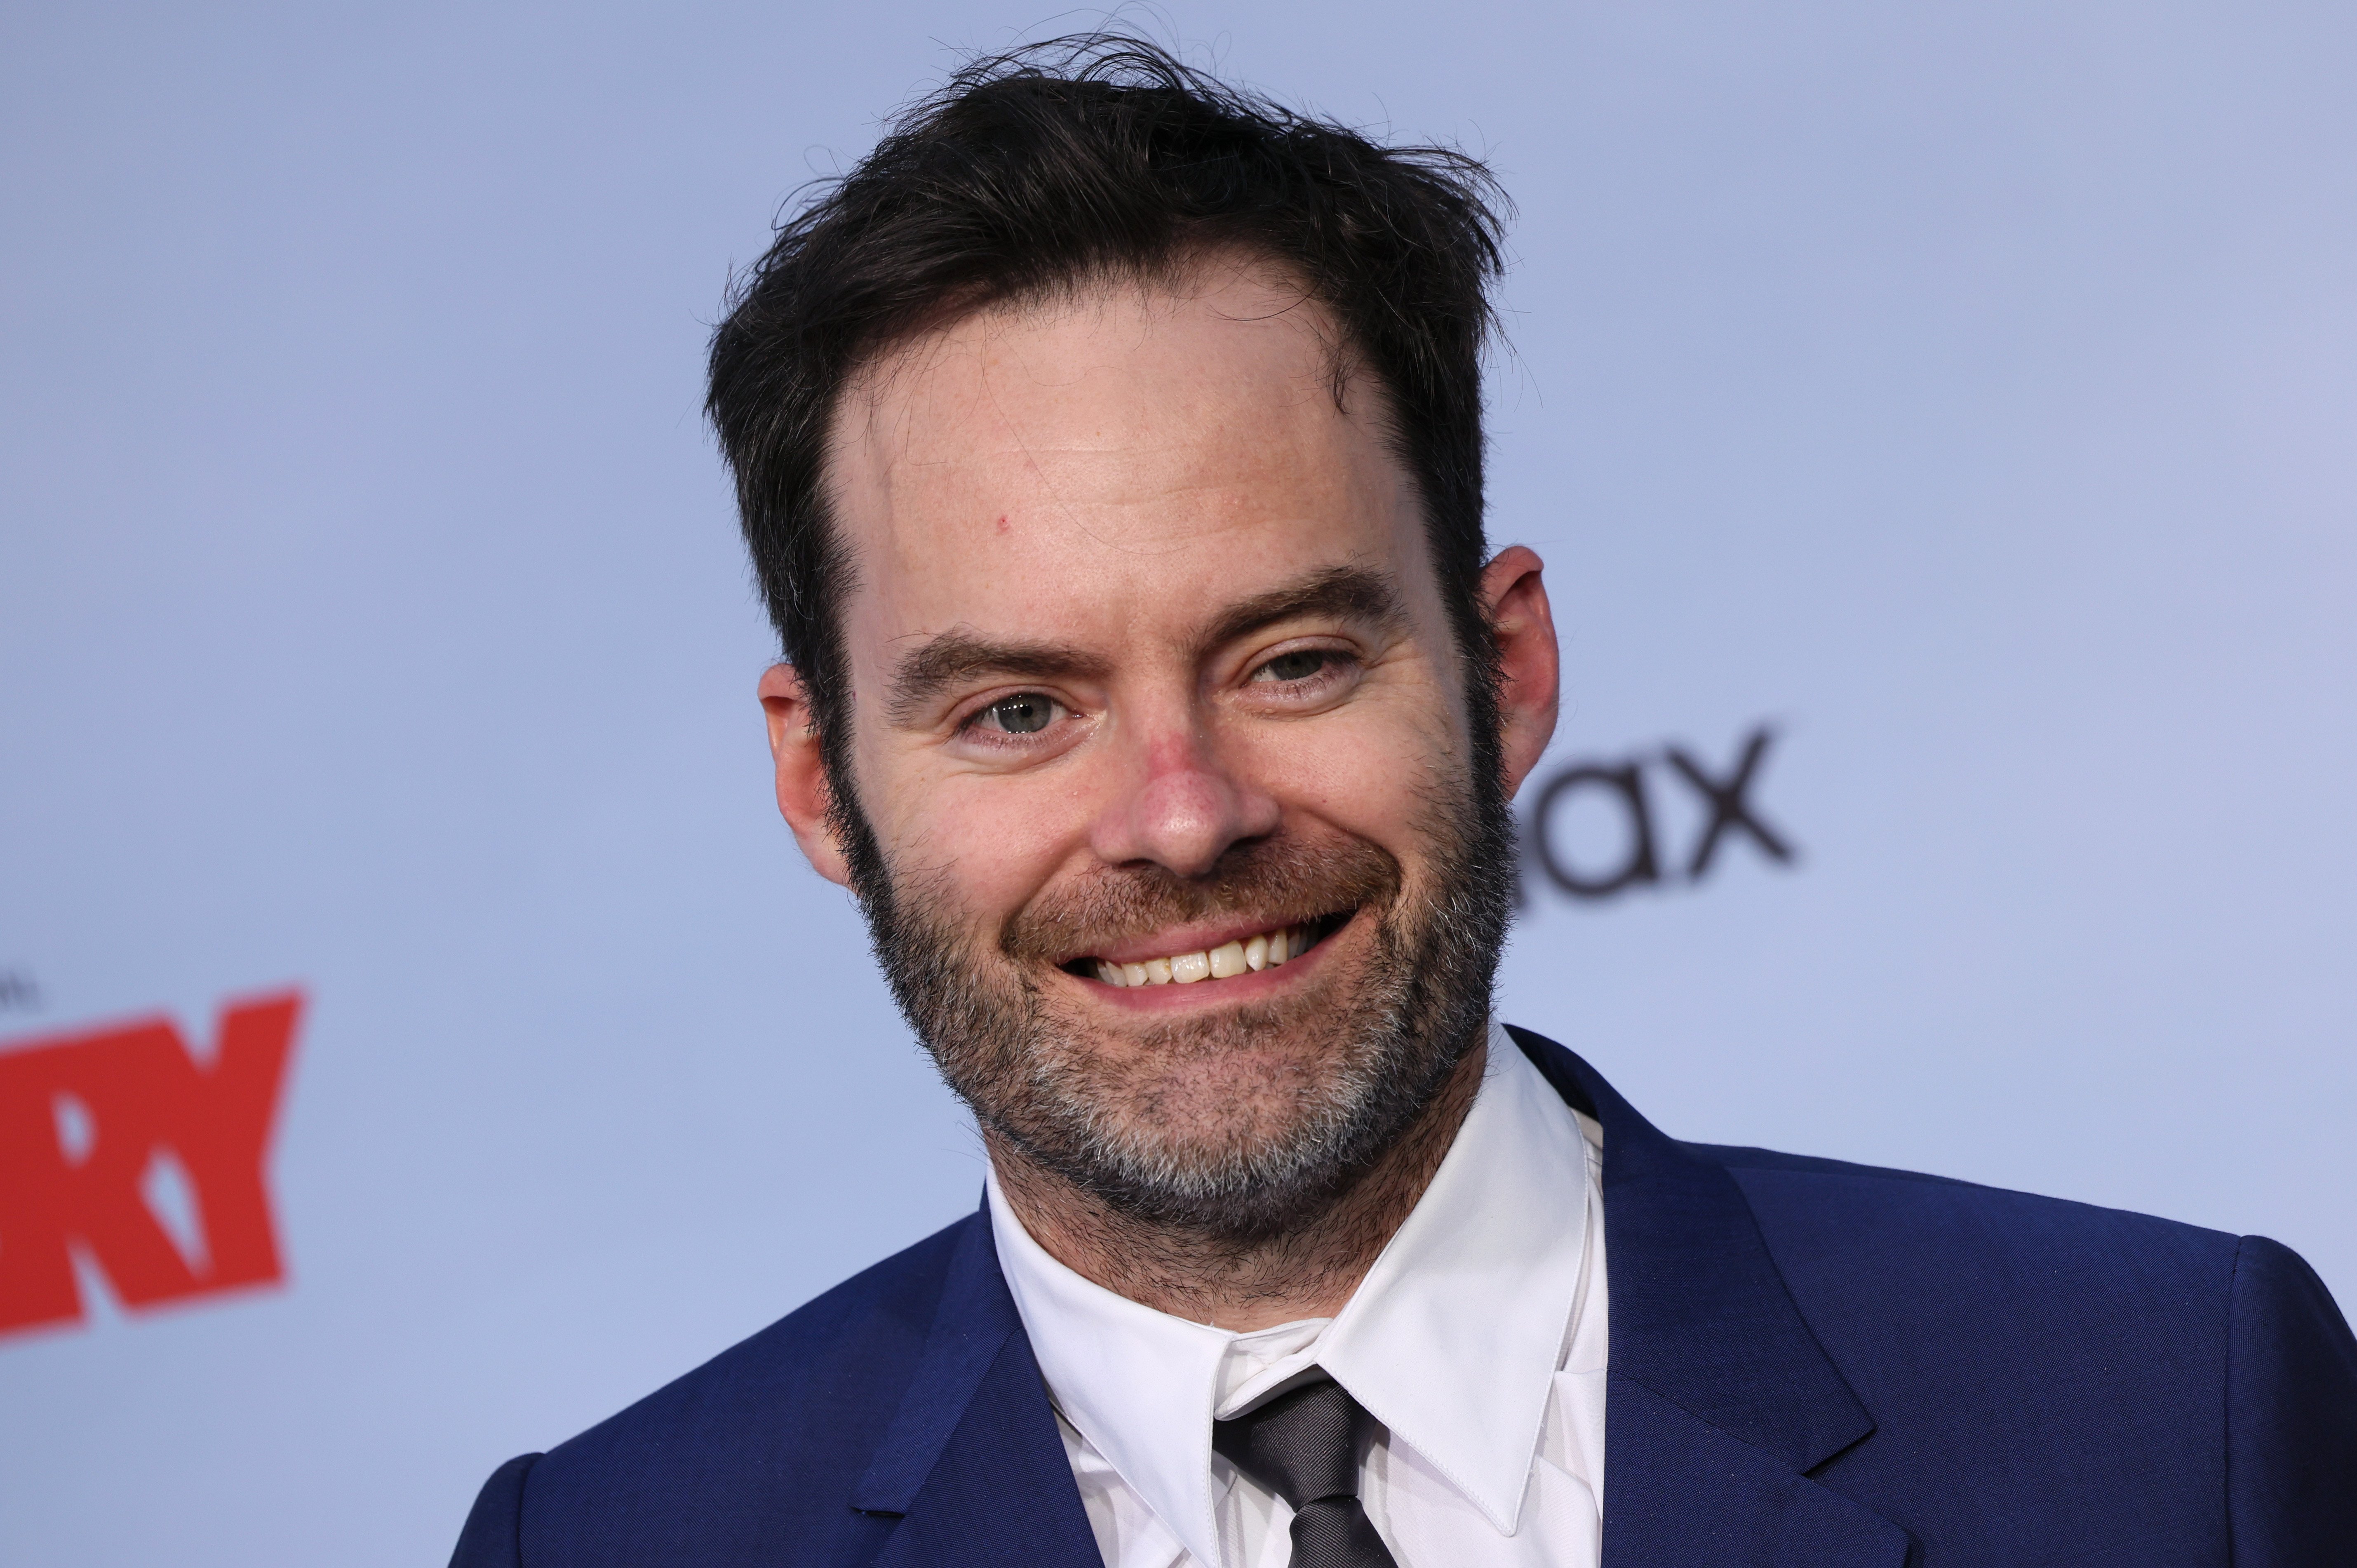 Bill Hader attends the season 3 premiere of HBO's "Barry" at Rolling Greens on April 18, 2022 in Culver City, California. | Source: Getty Images